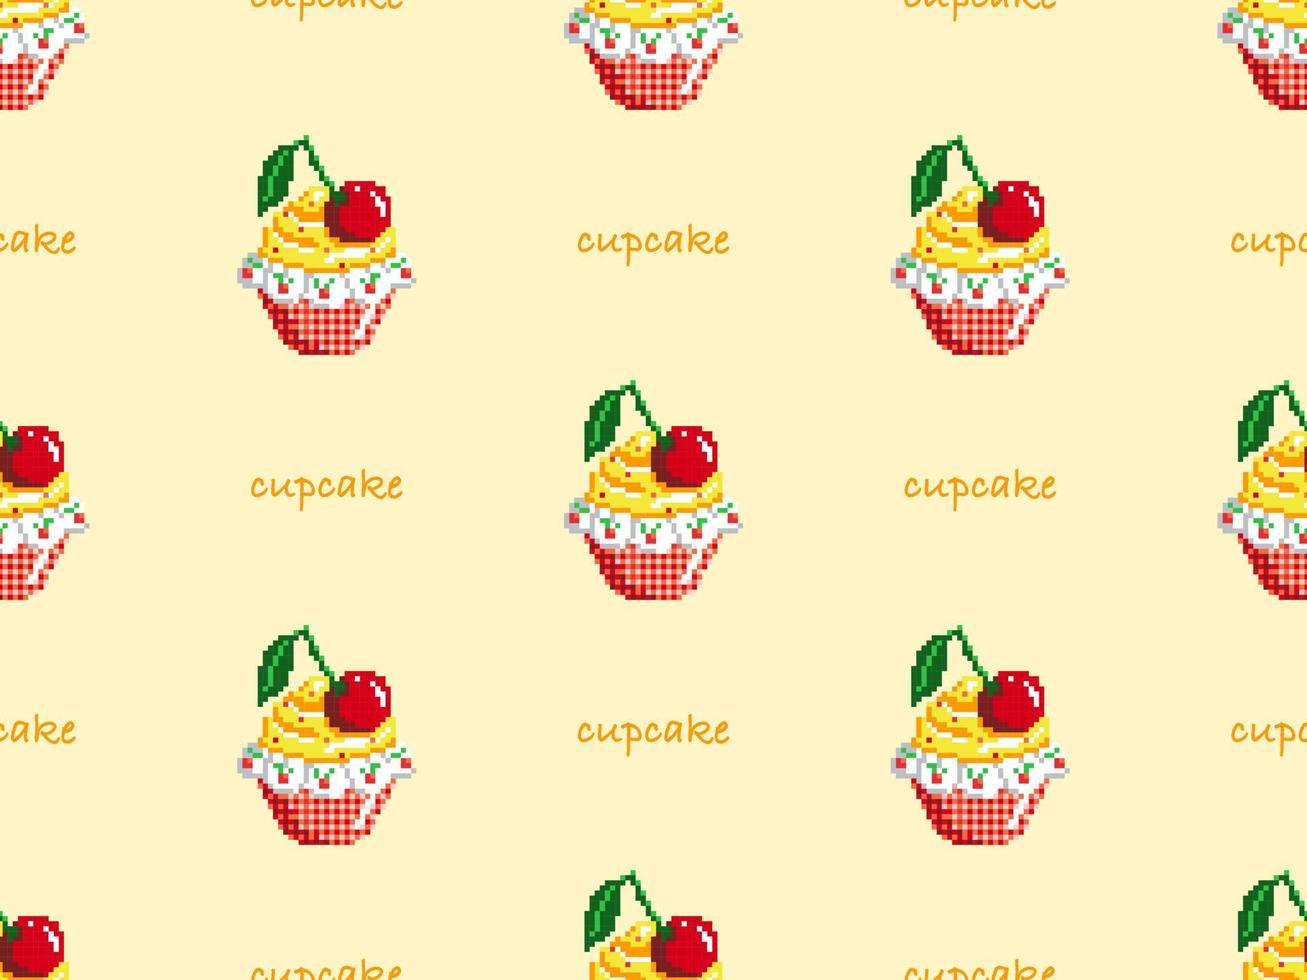 Cup cake cartoon character seamless pattern on yellow background. Pixel style vector